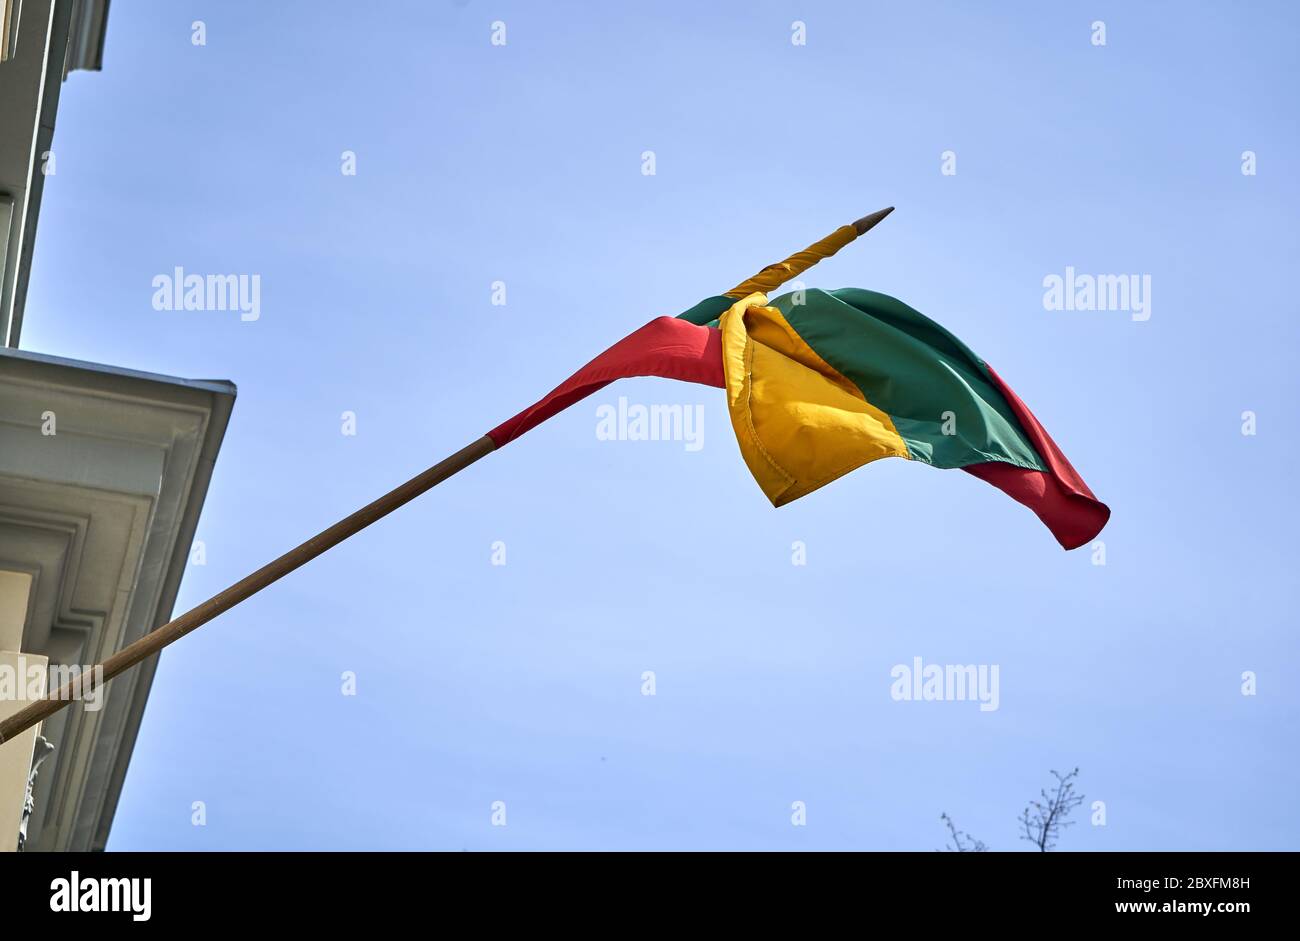 Republic of Lithuania flag on a windy day Stock Photo